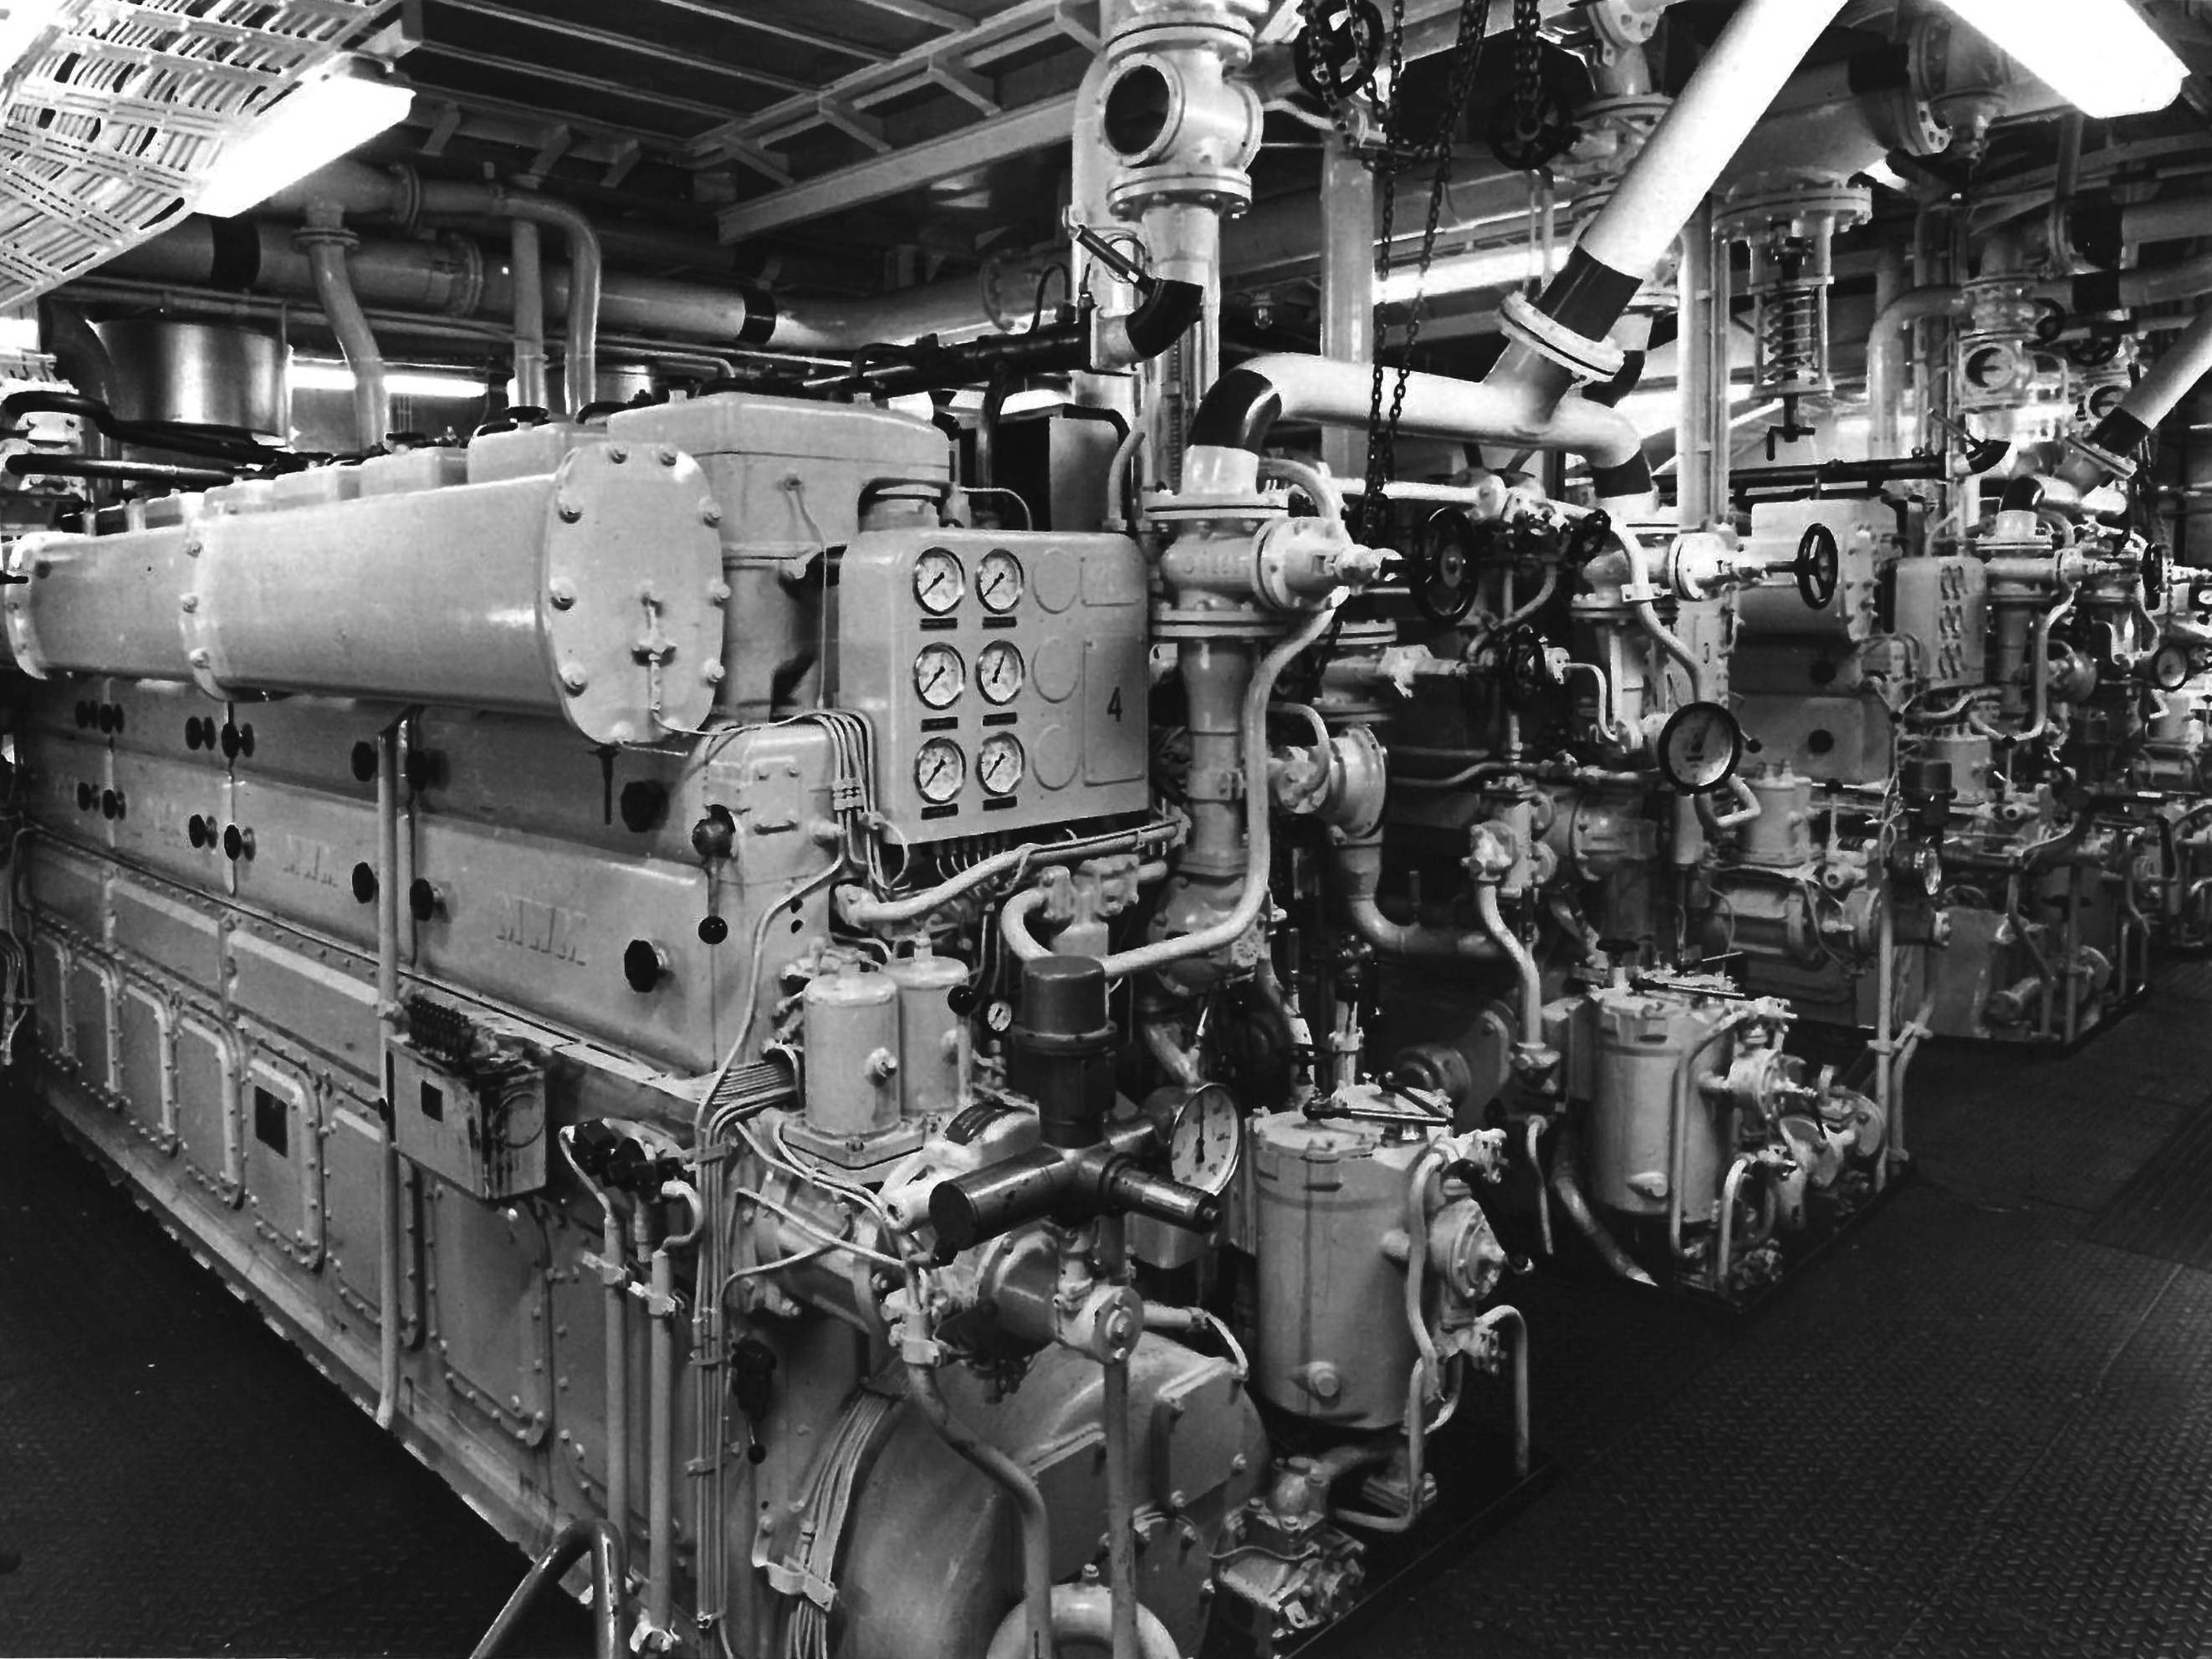 The image shows an old ships' engine room with MWM engines